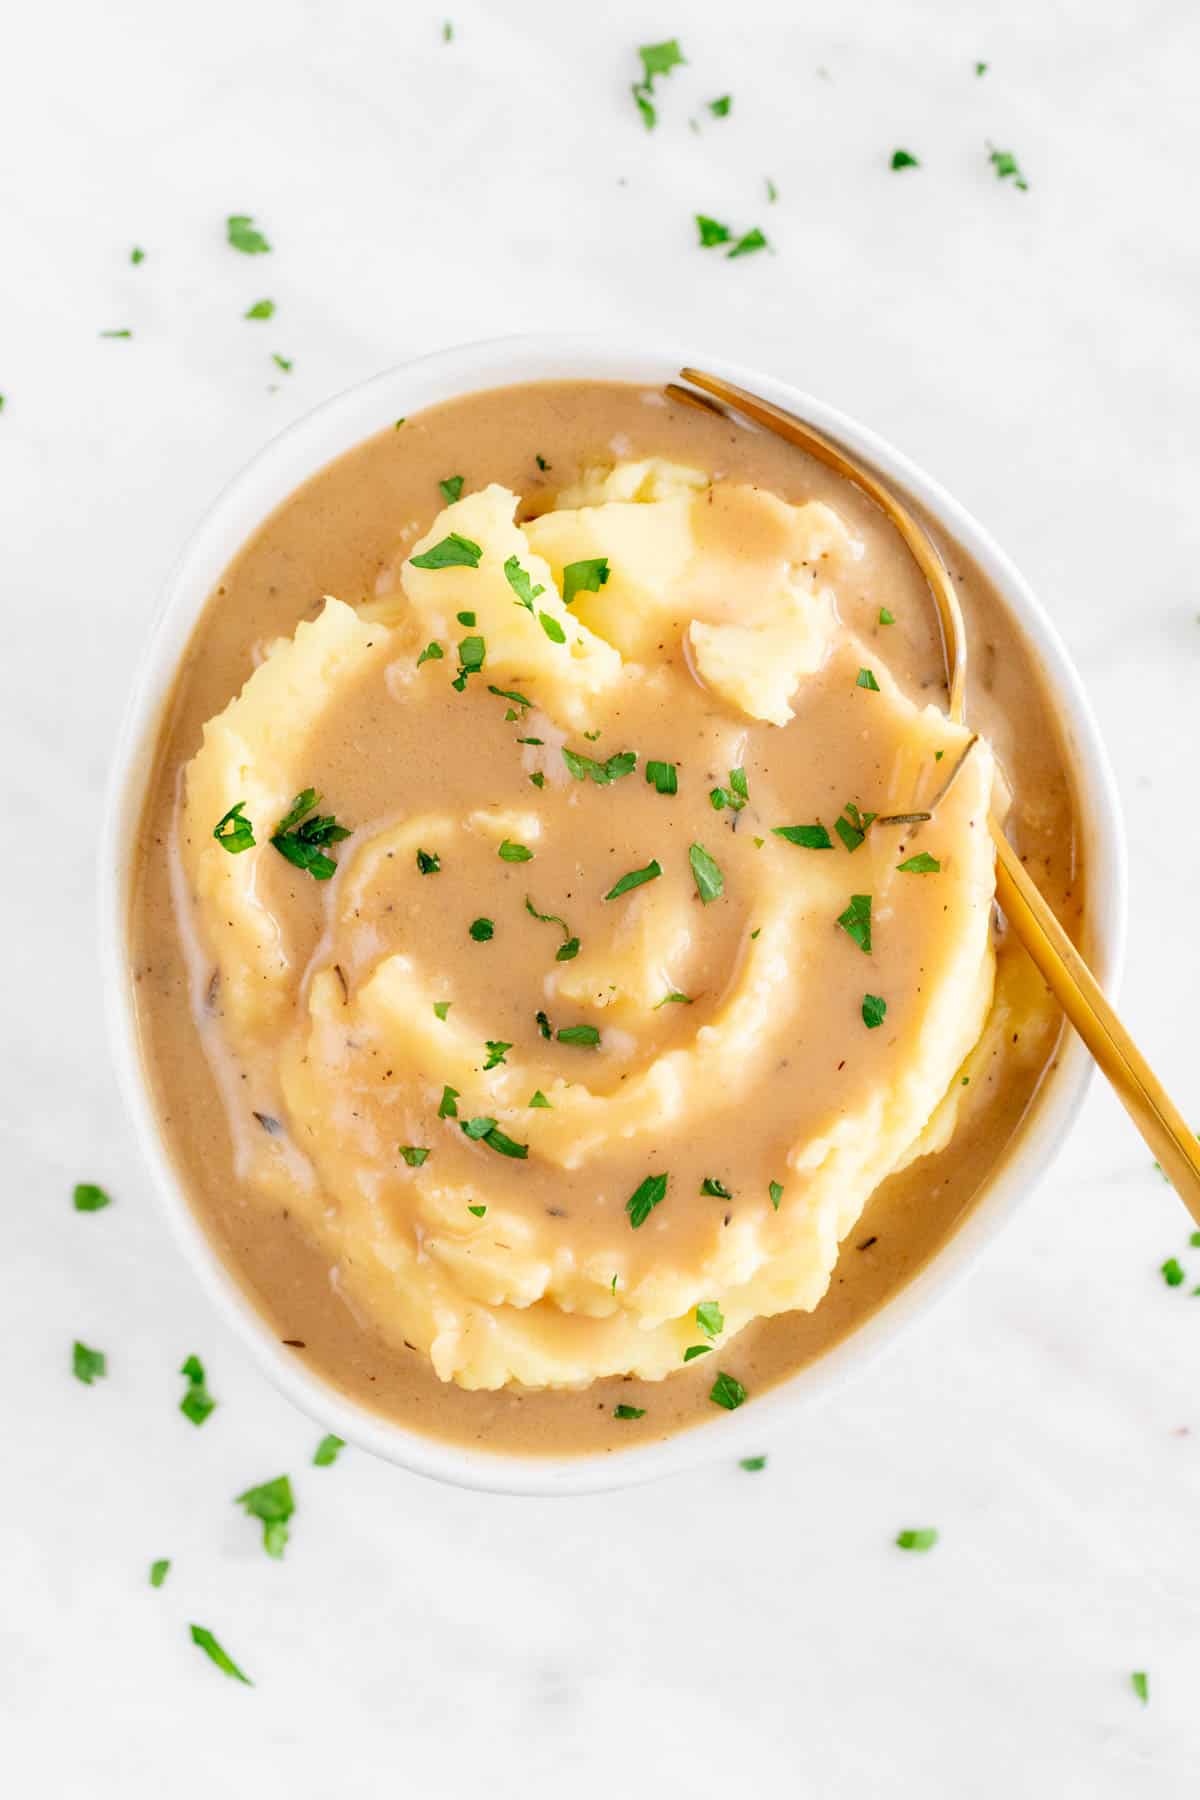 Bowl with mashed potatoes and vegan gravy garnished with parsley and a spoon.